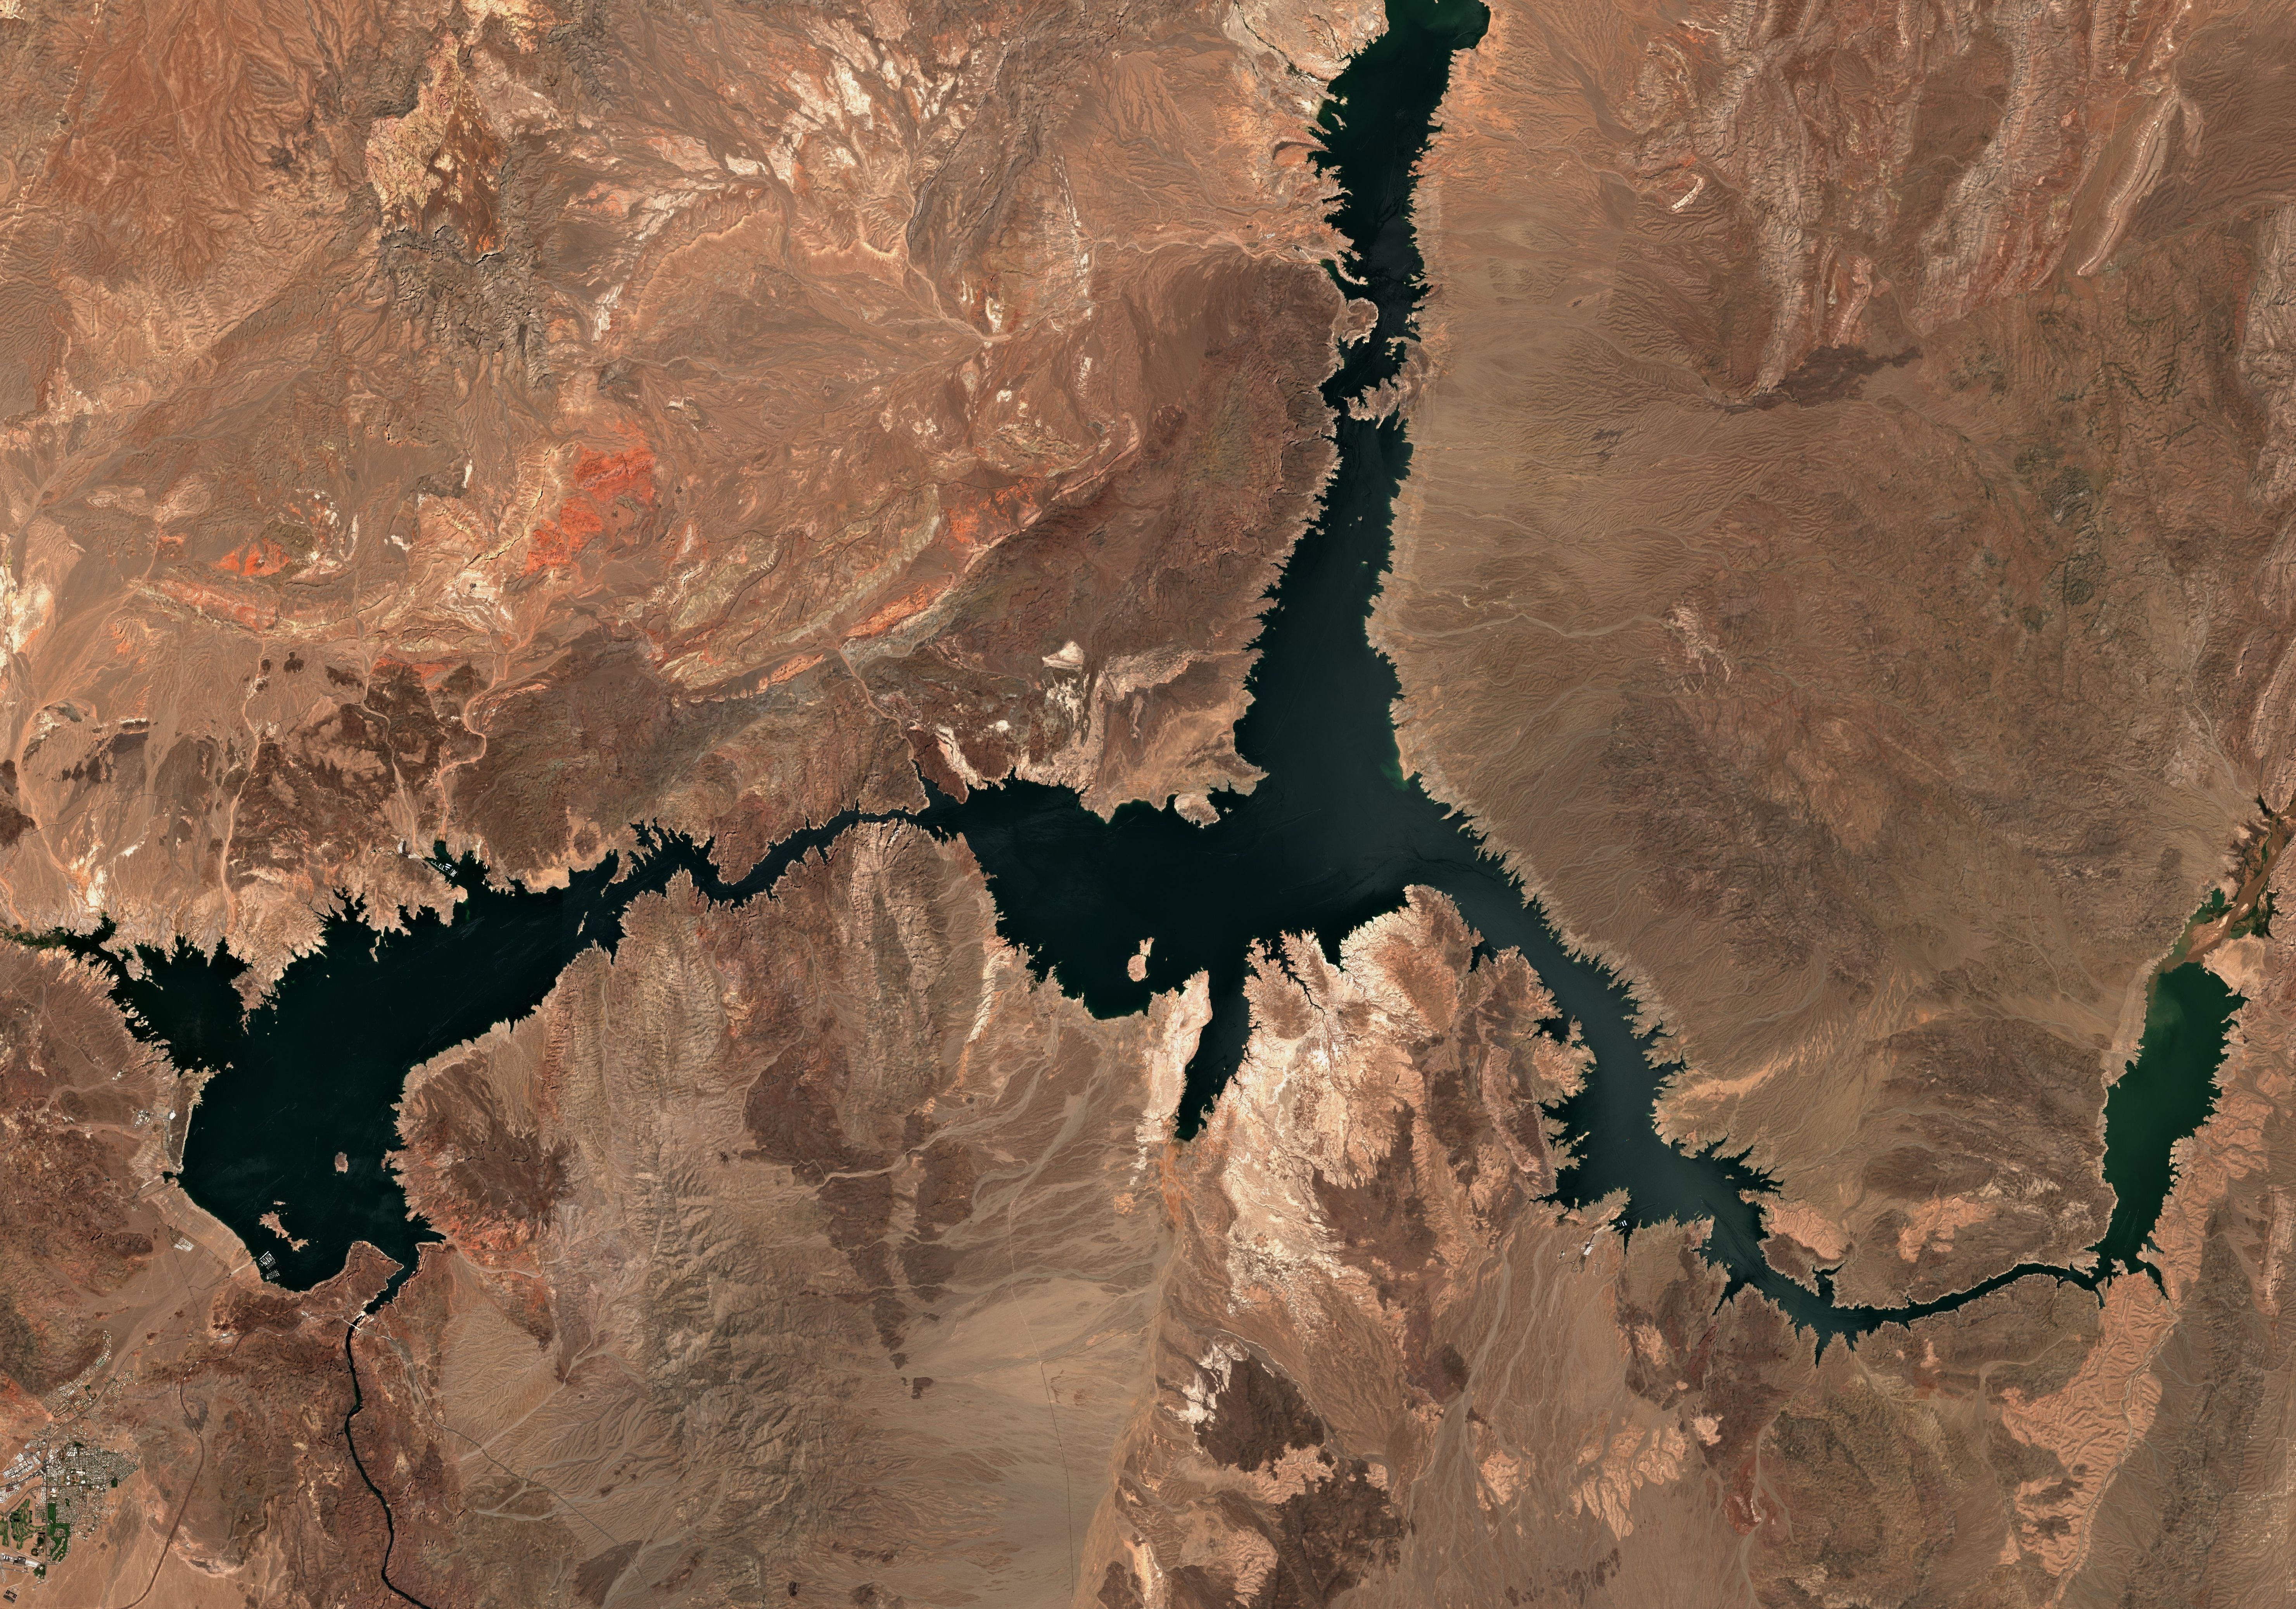 Lake Mead on the Colorado River, straddling the states of Nevada and Arizona on Aug. 8 2020